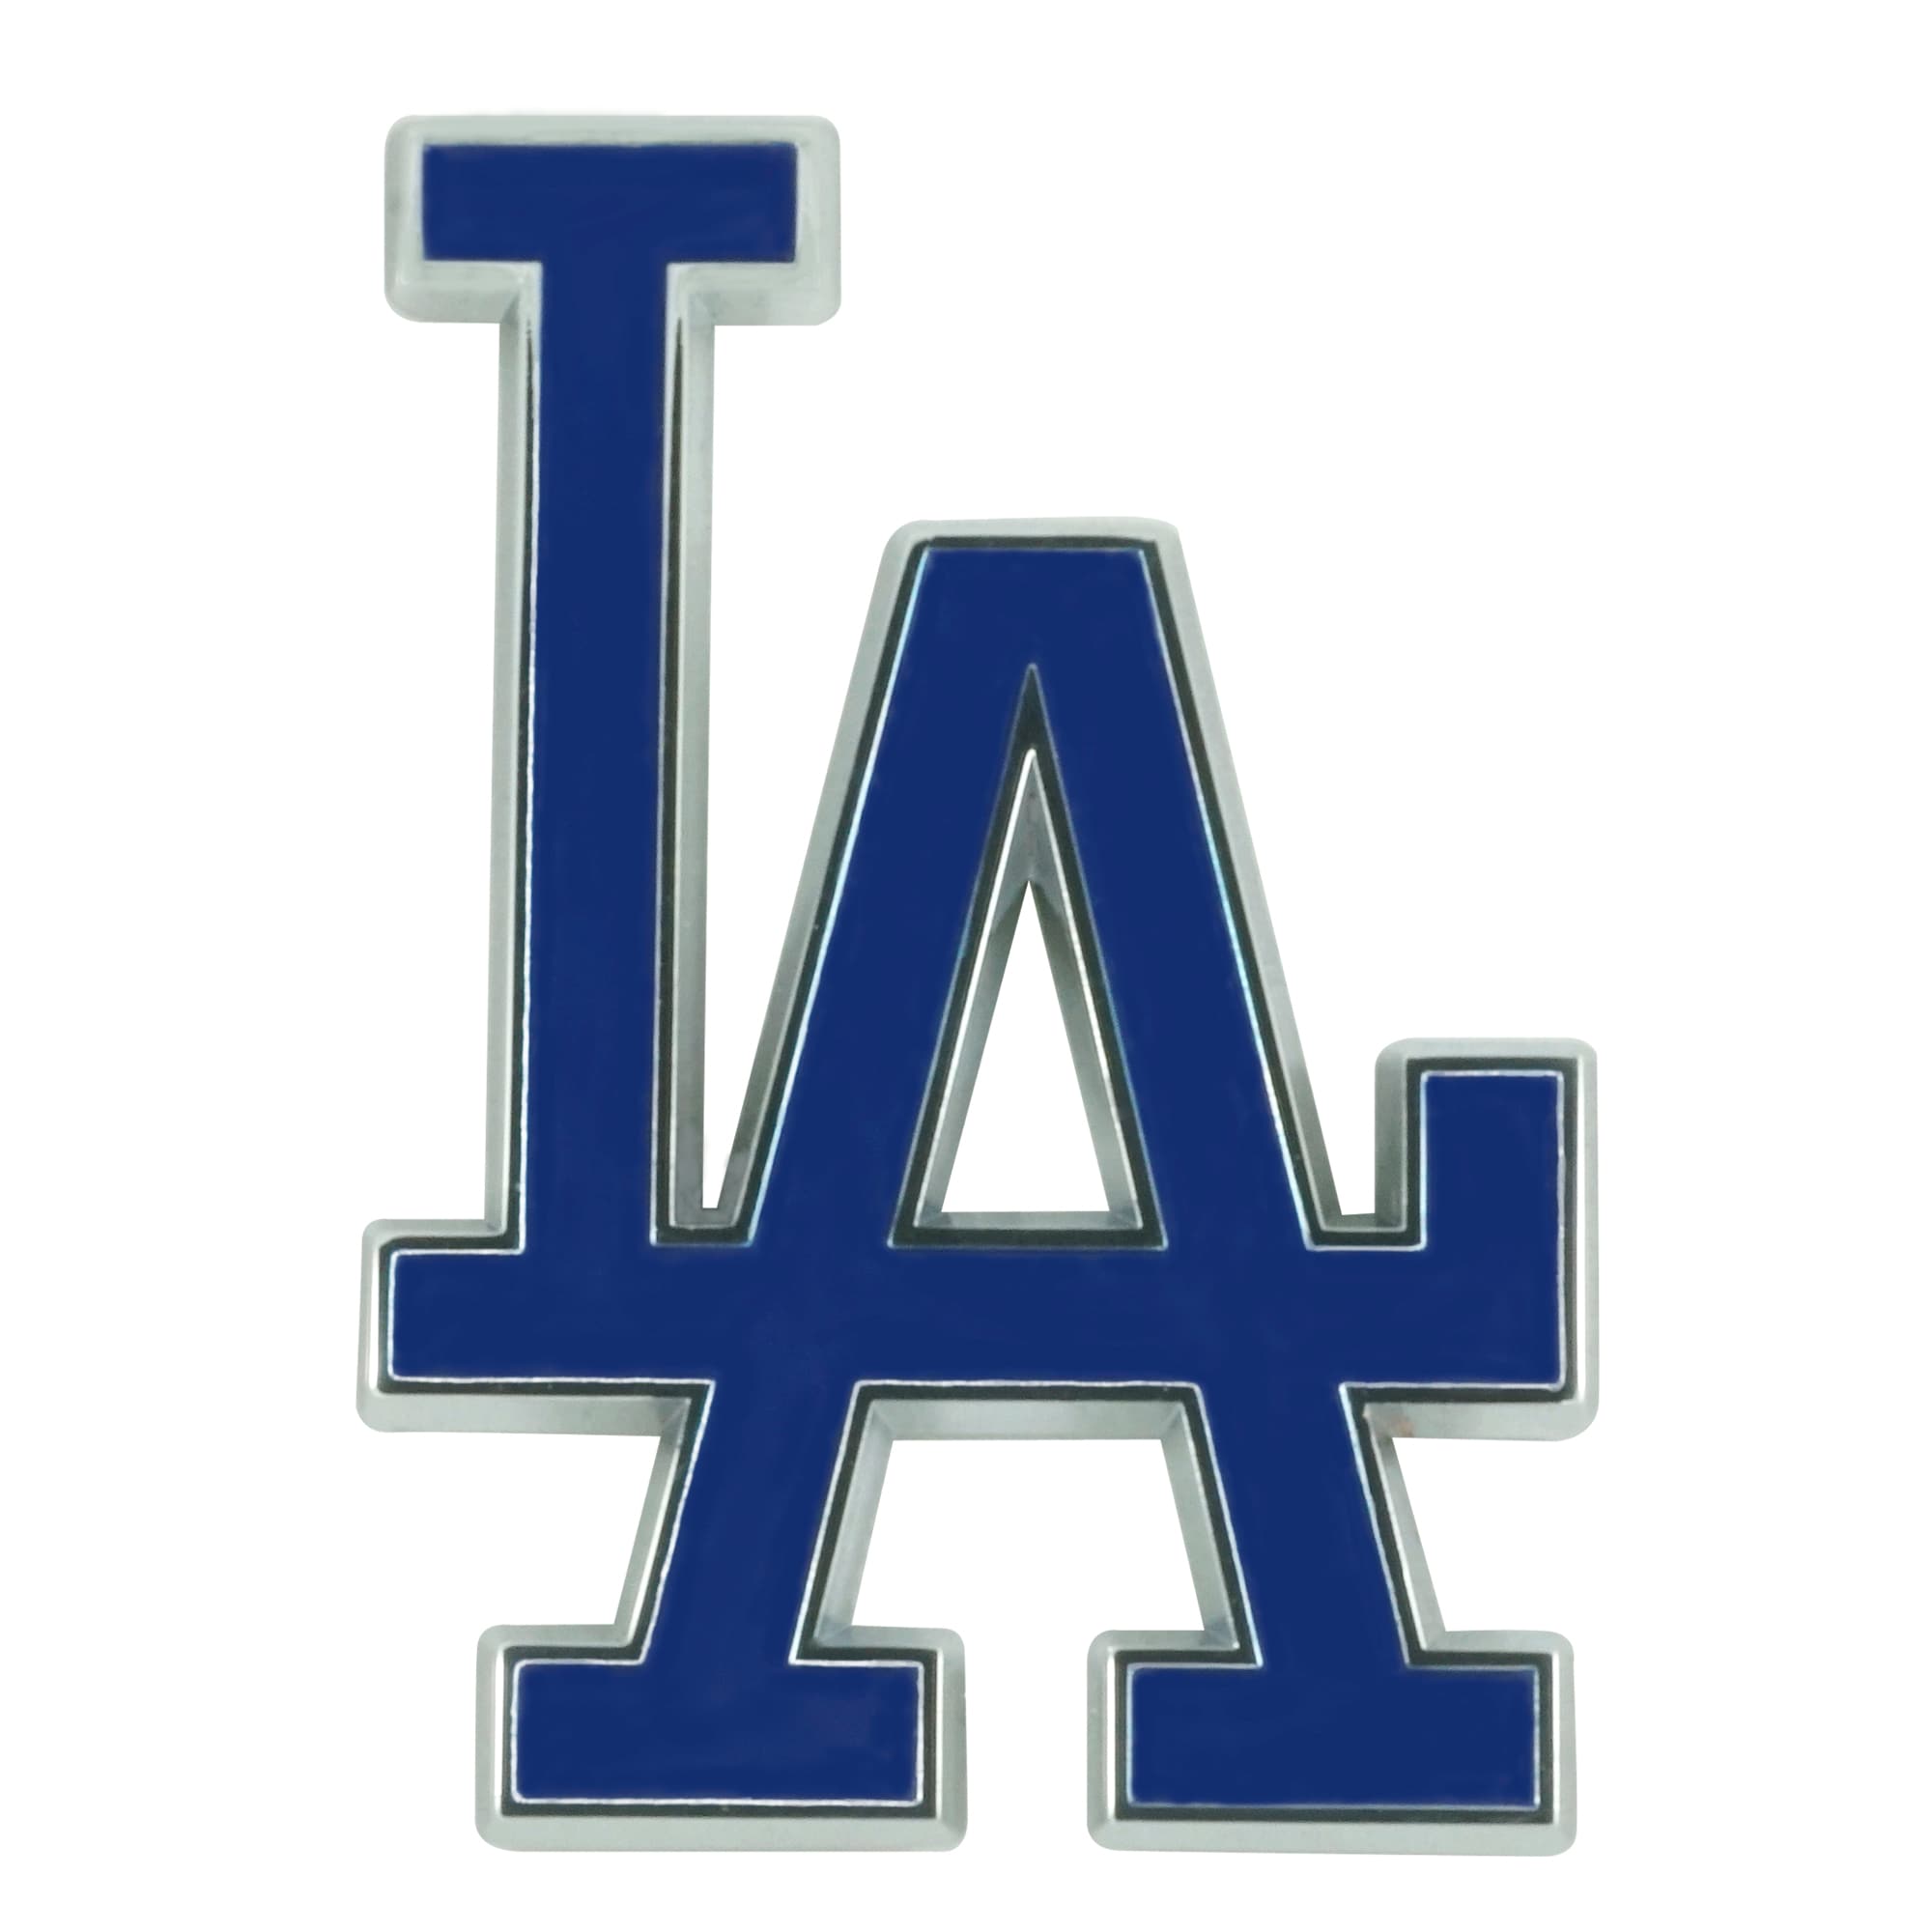 Is Chargers' new logo the product of a Dodgers-Lightning hookup?